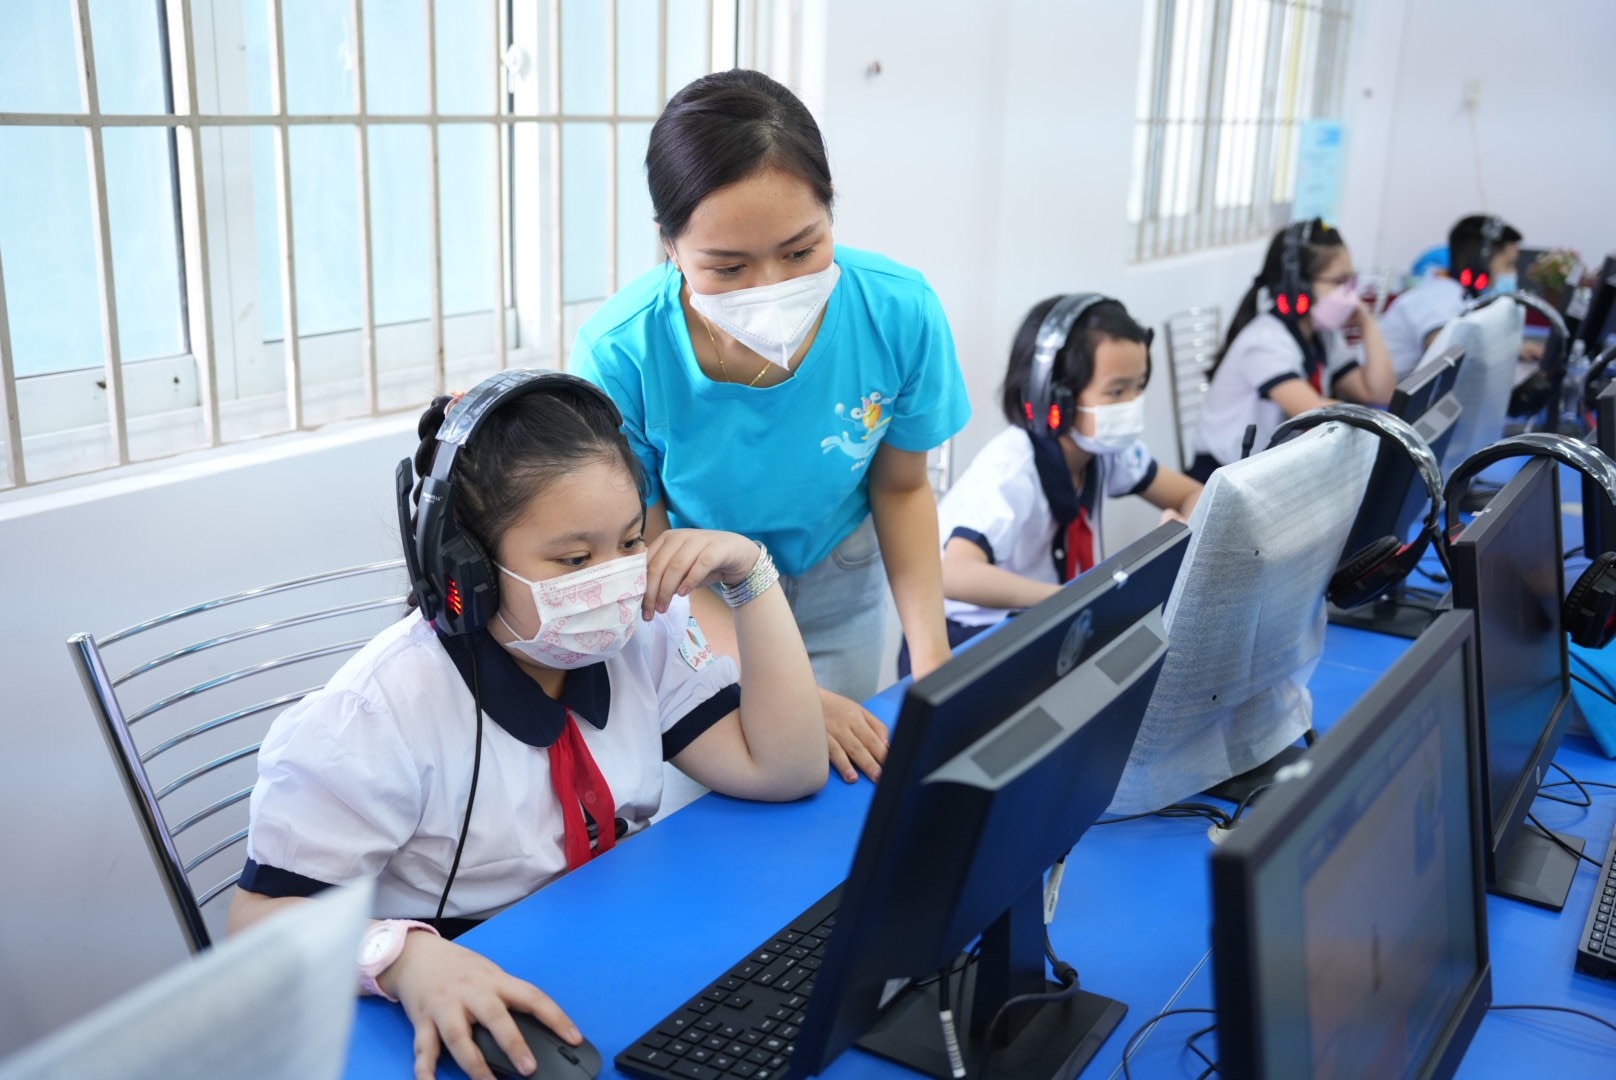 BASF Virtual Lab offers three additional experiments in Vietnamese